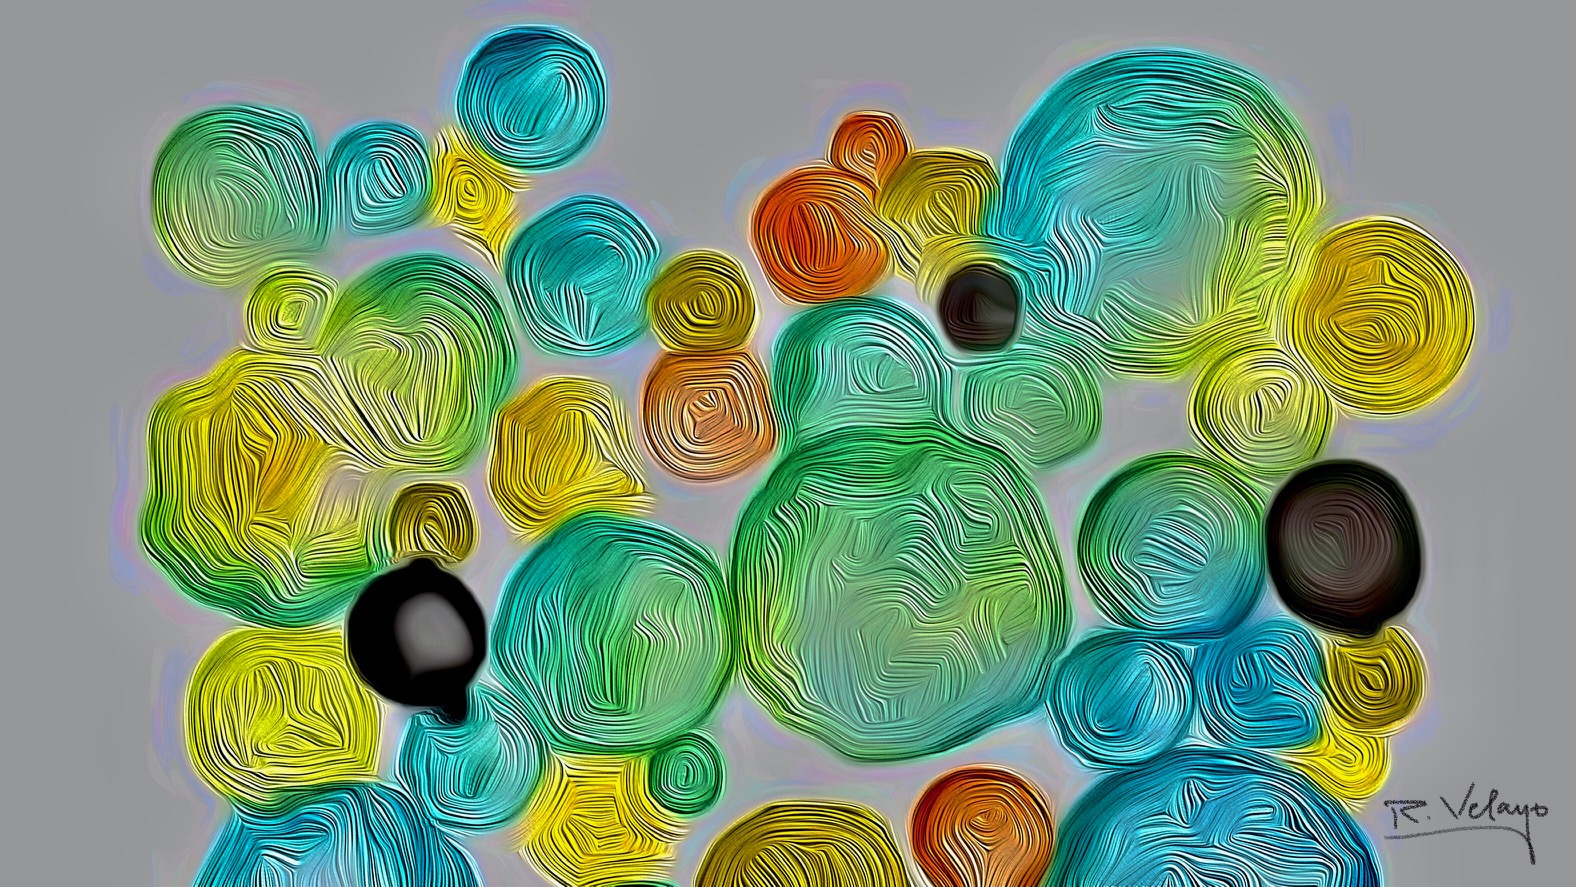 "WAVY SPHERES IN DIFFERENT COLORS AND SIZES" [Created: 1/11/2021]